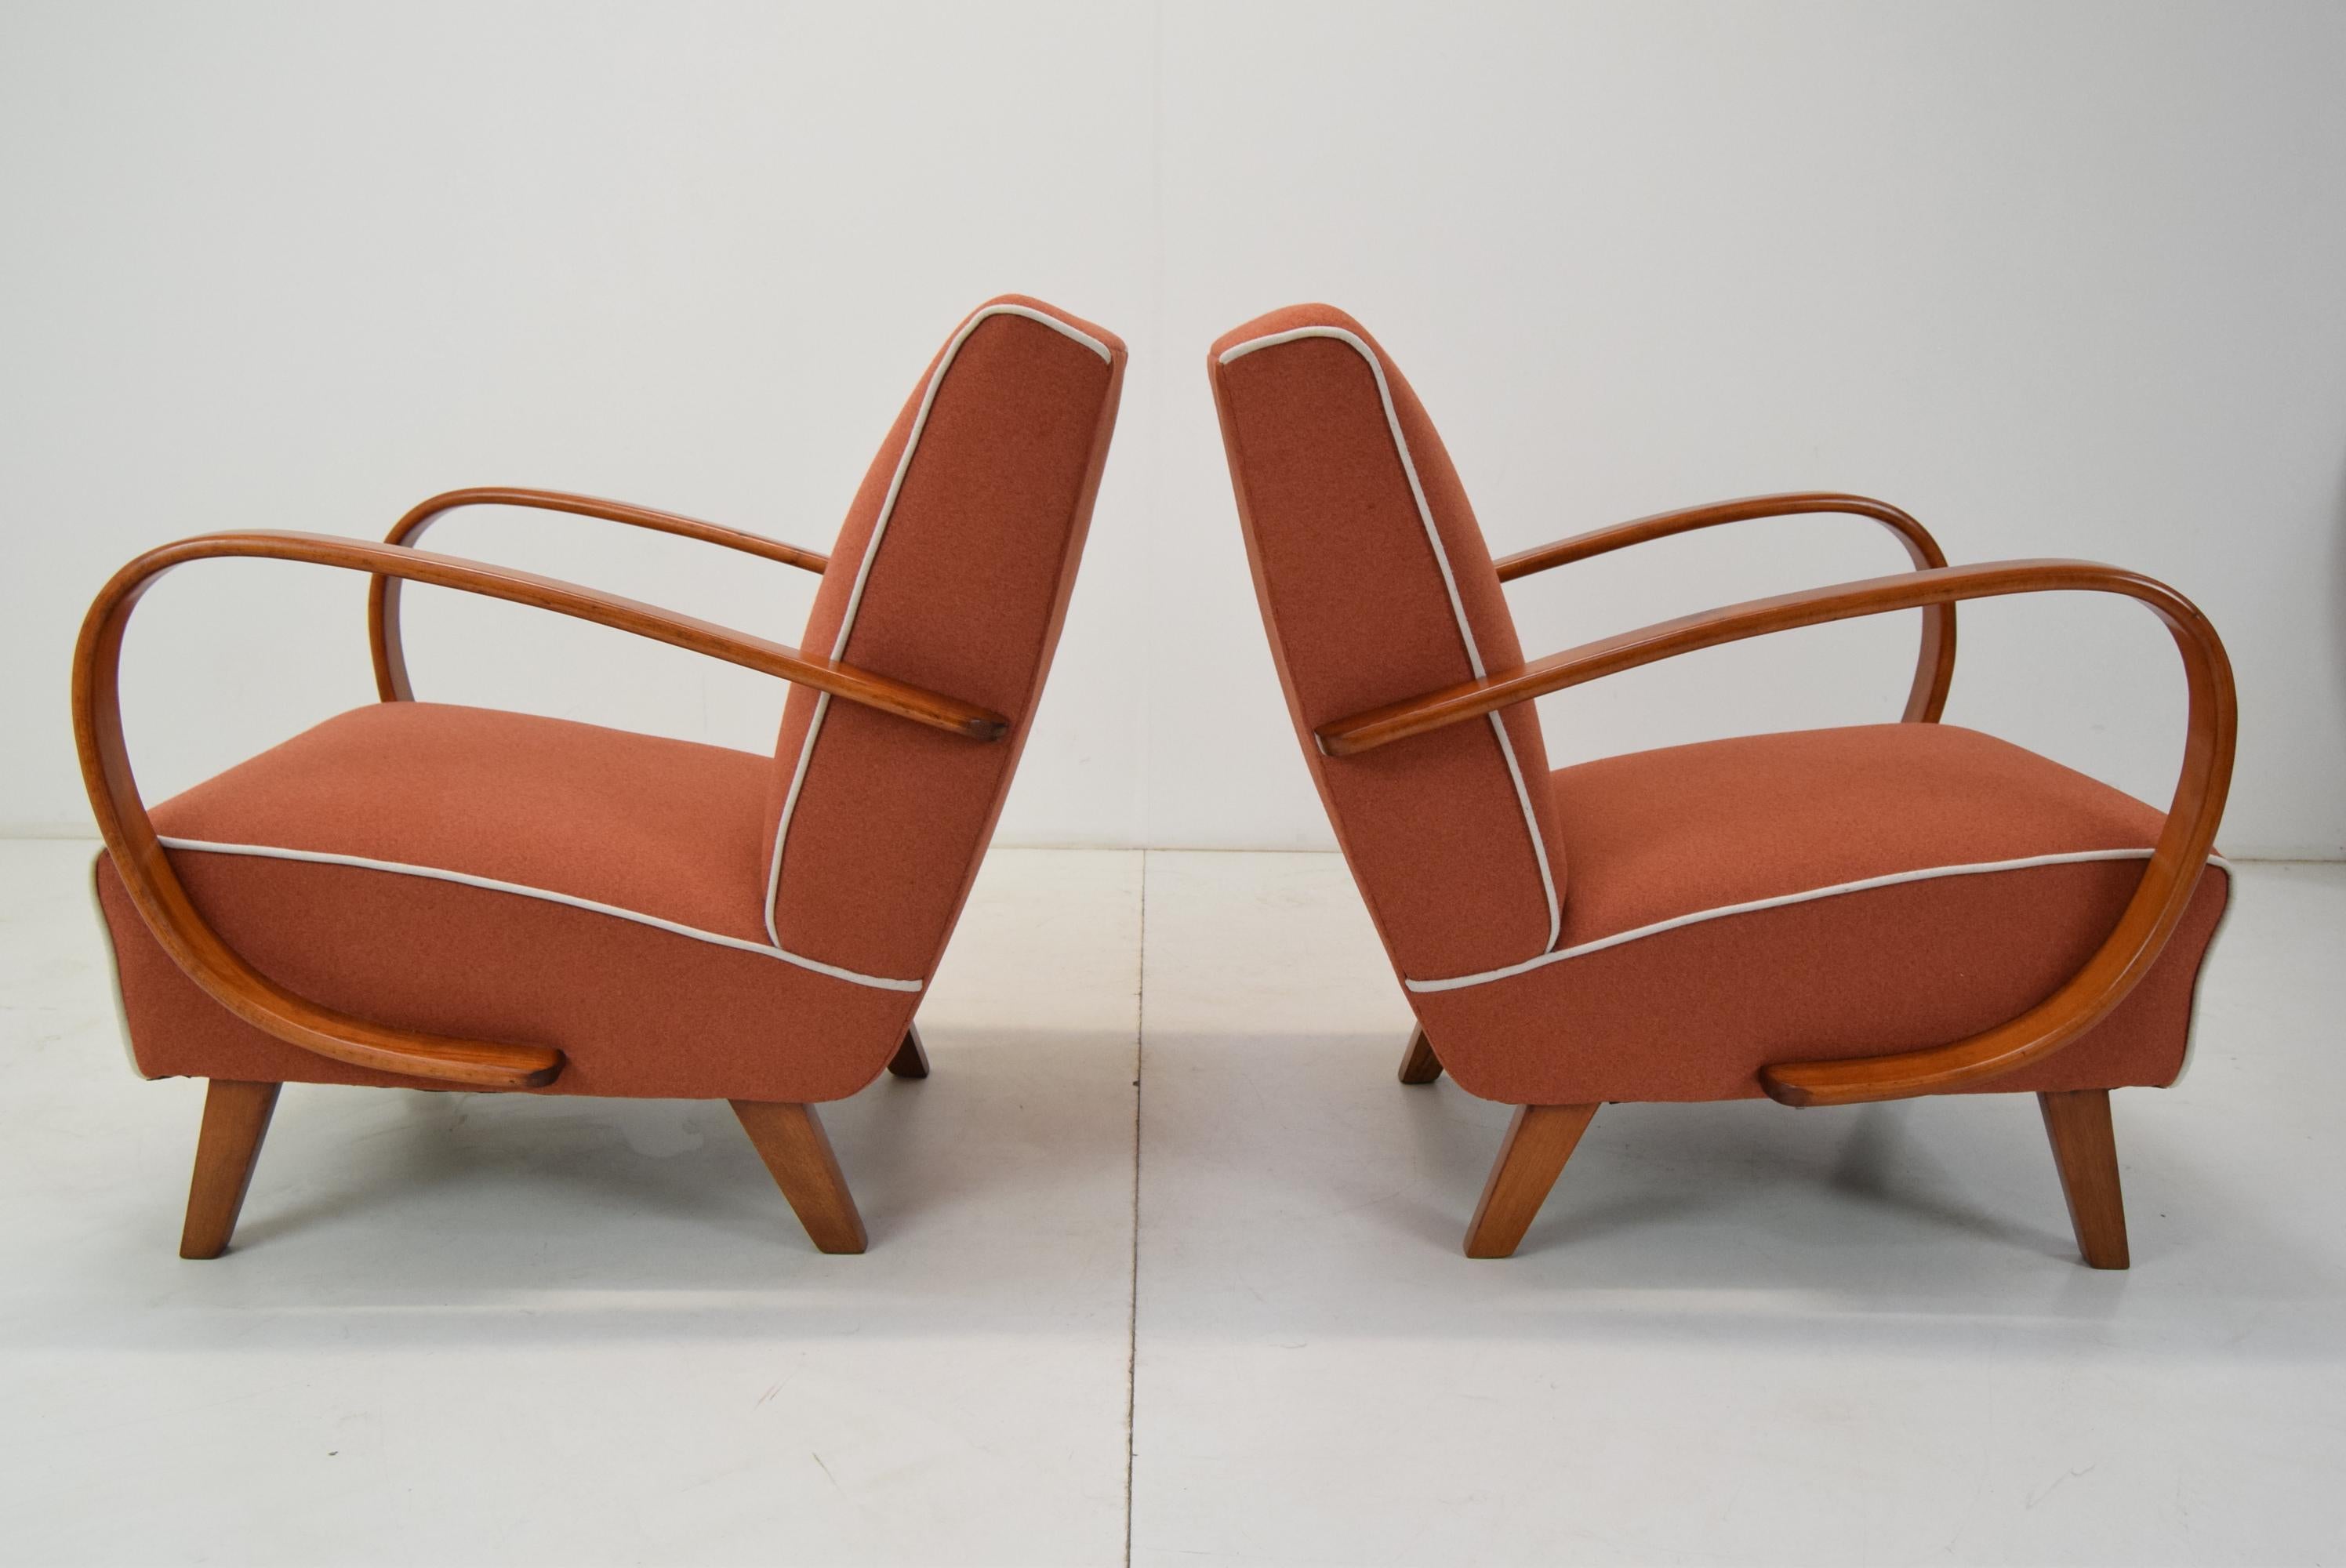 Pair of Mid-Century Armchairs by Jindrich Halabala, 1950s For Sale 2